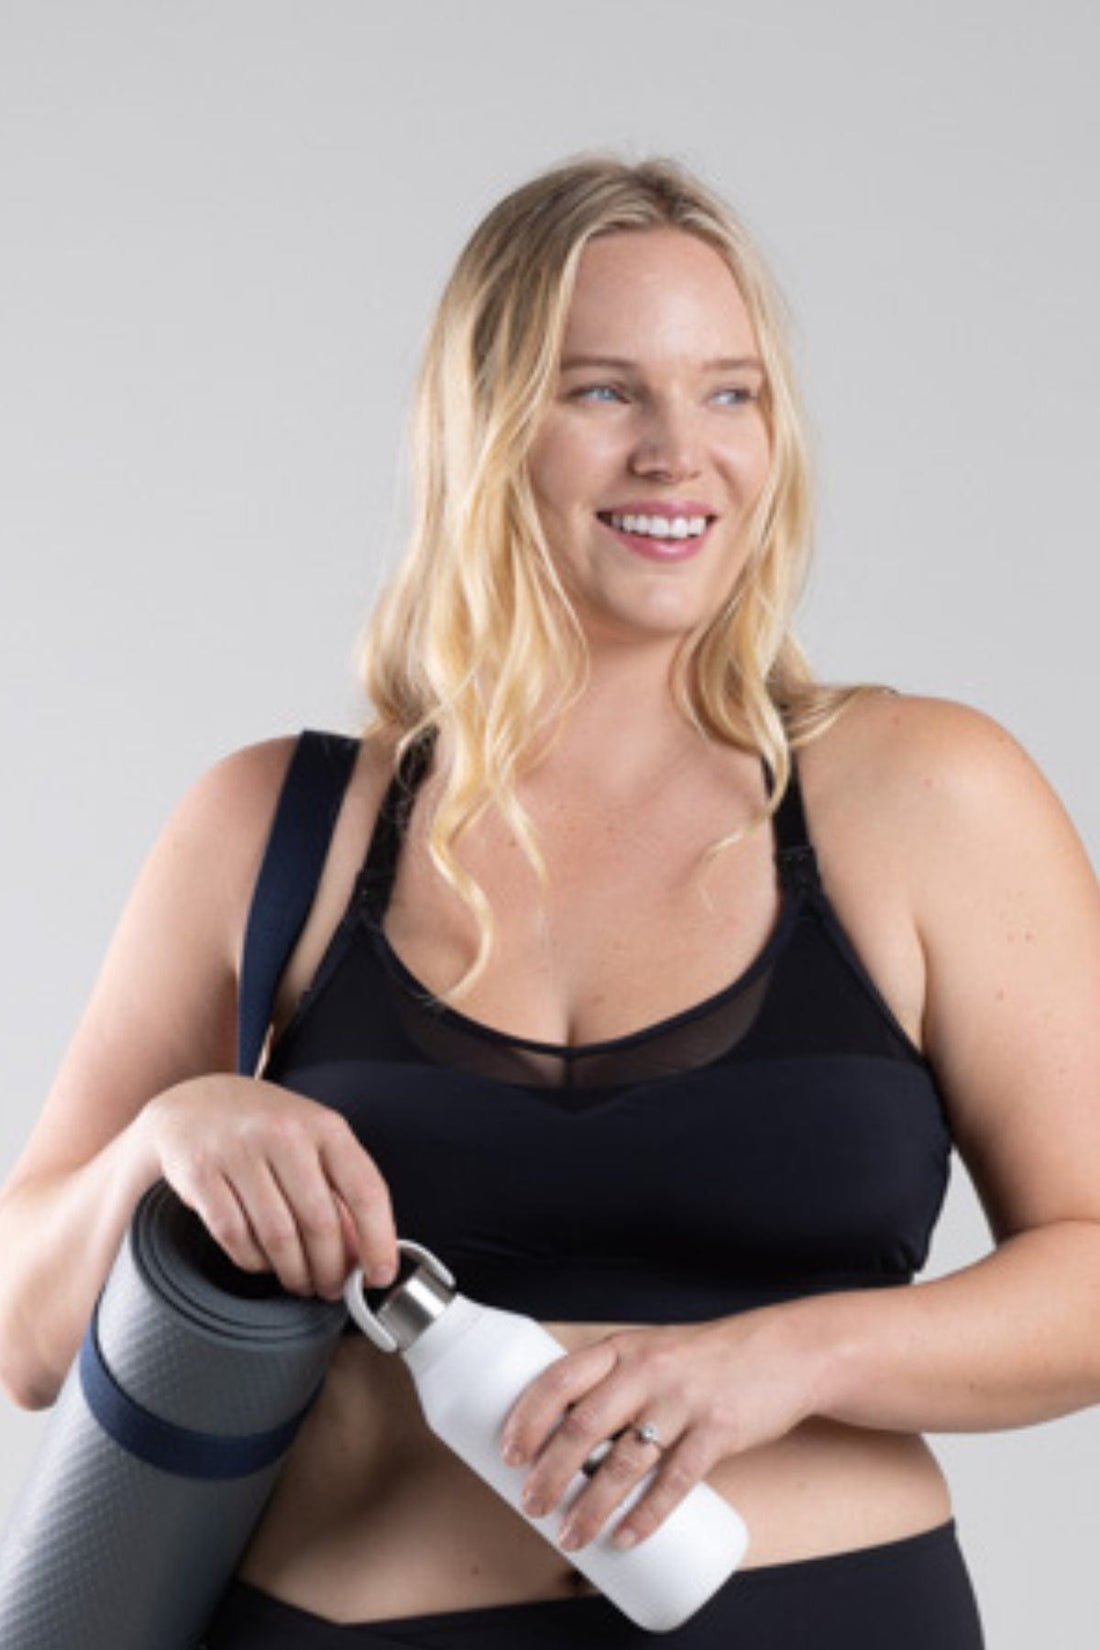 Efficient and Sporty: Pumping Sports Bras for Active Moms – Simple